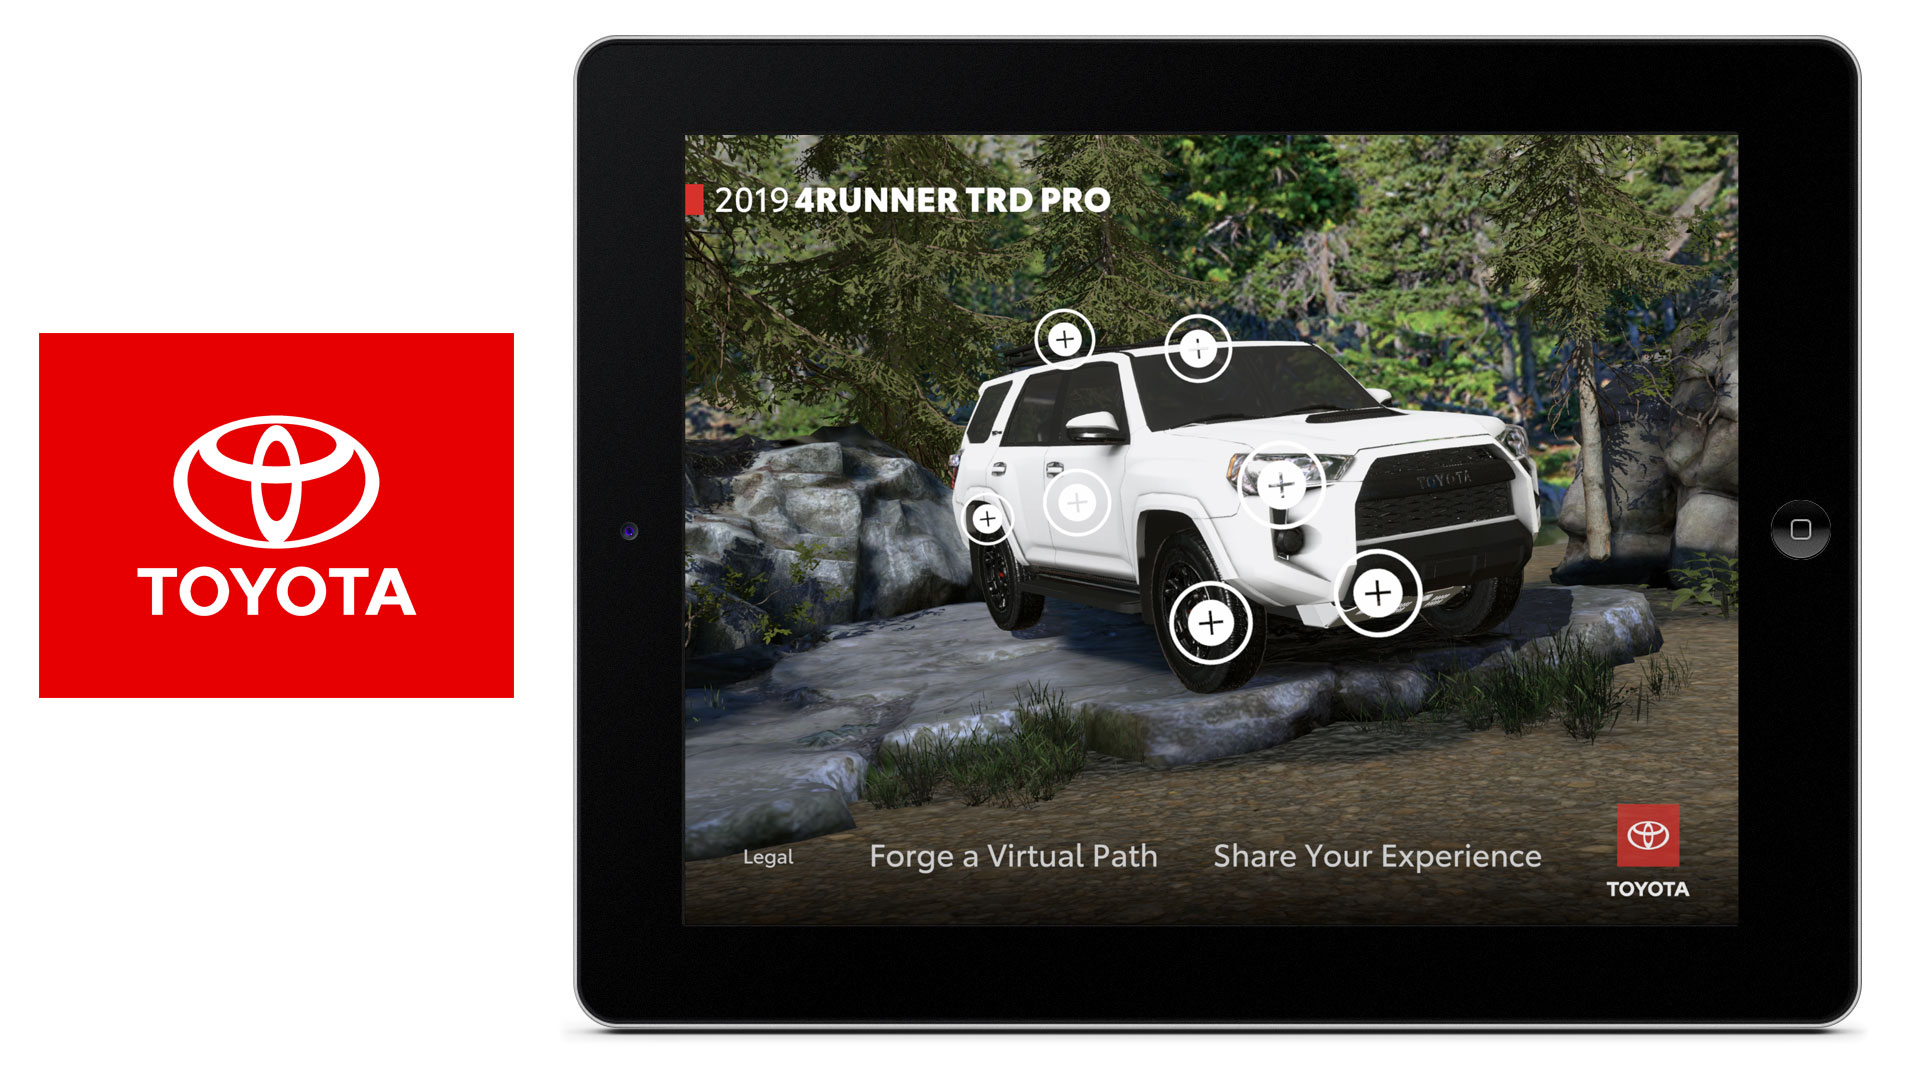 Toyota Augmented Reality